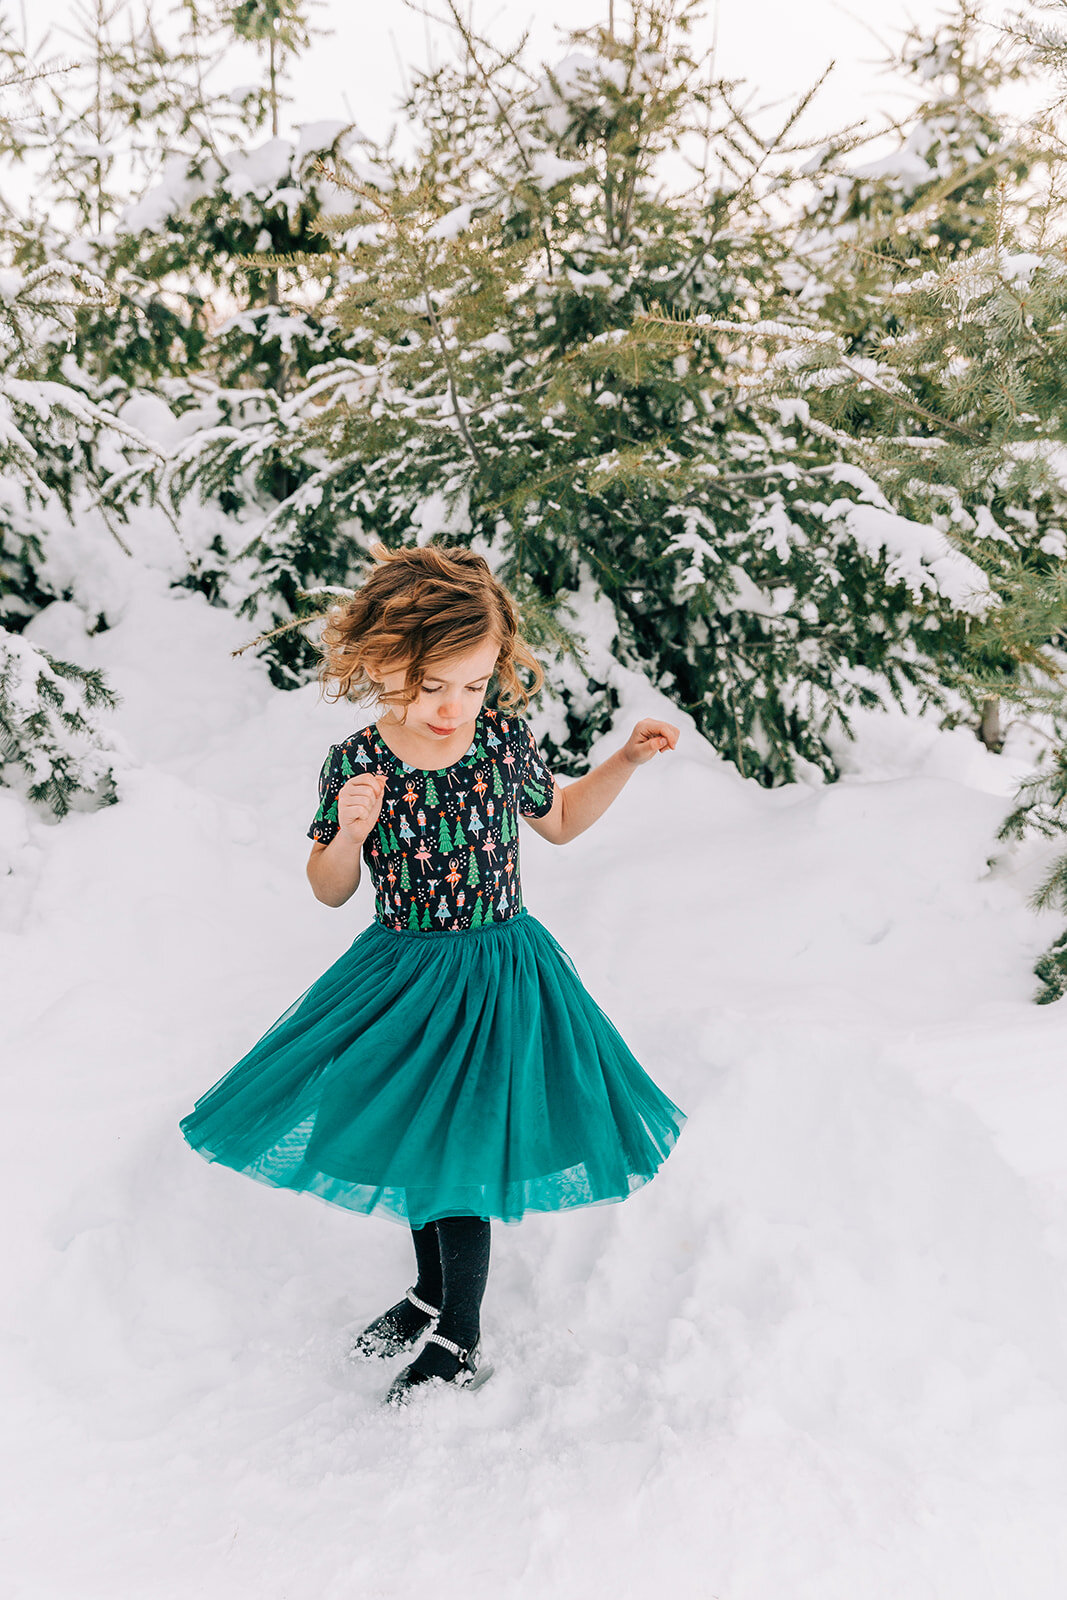  young girl twirling in a tulle dress fun pose ideas winter fashion family pictures daughters family picture styling inspiration family pose ideas winter photoshoot snowy pictures adams acres tree farm family photographers in utah professional family